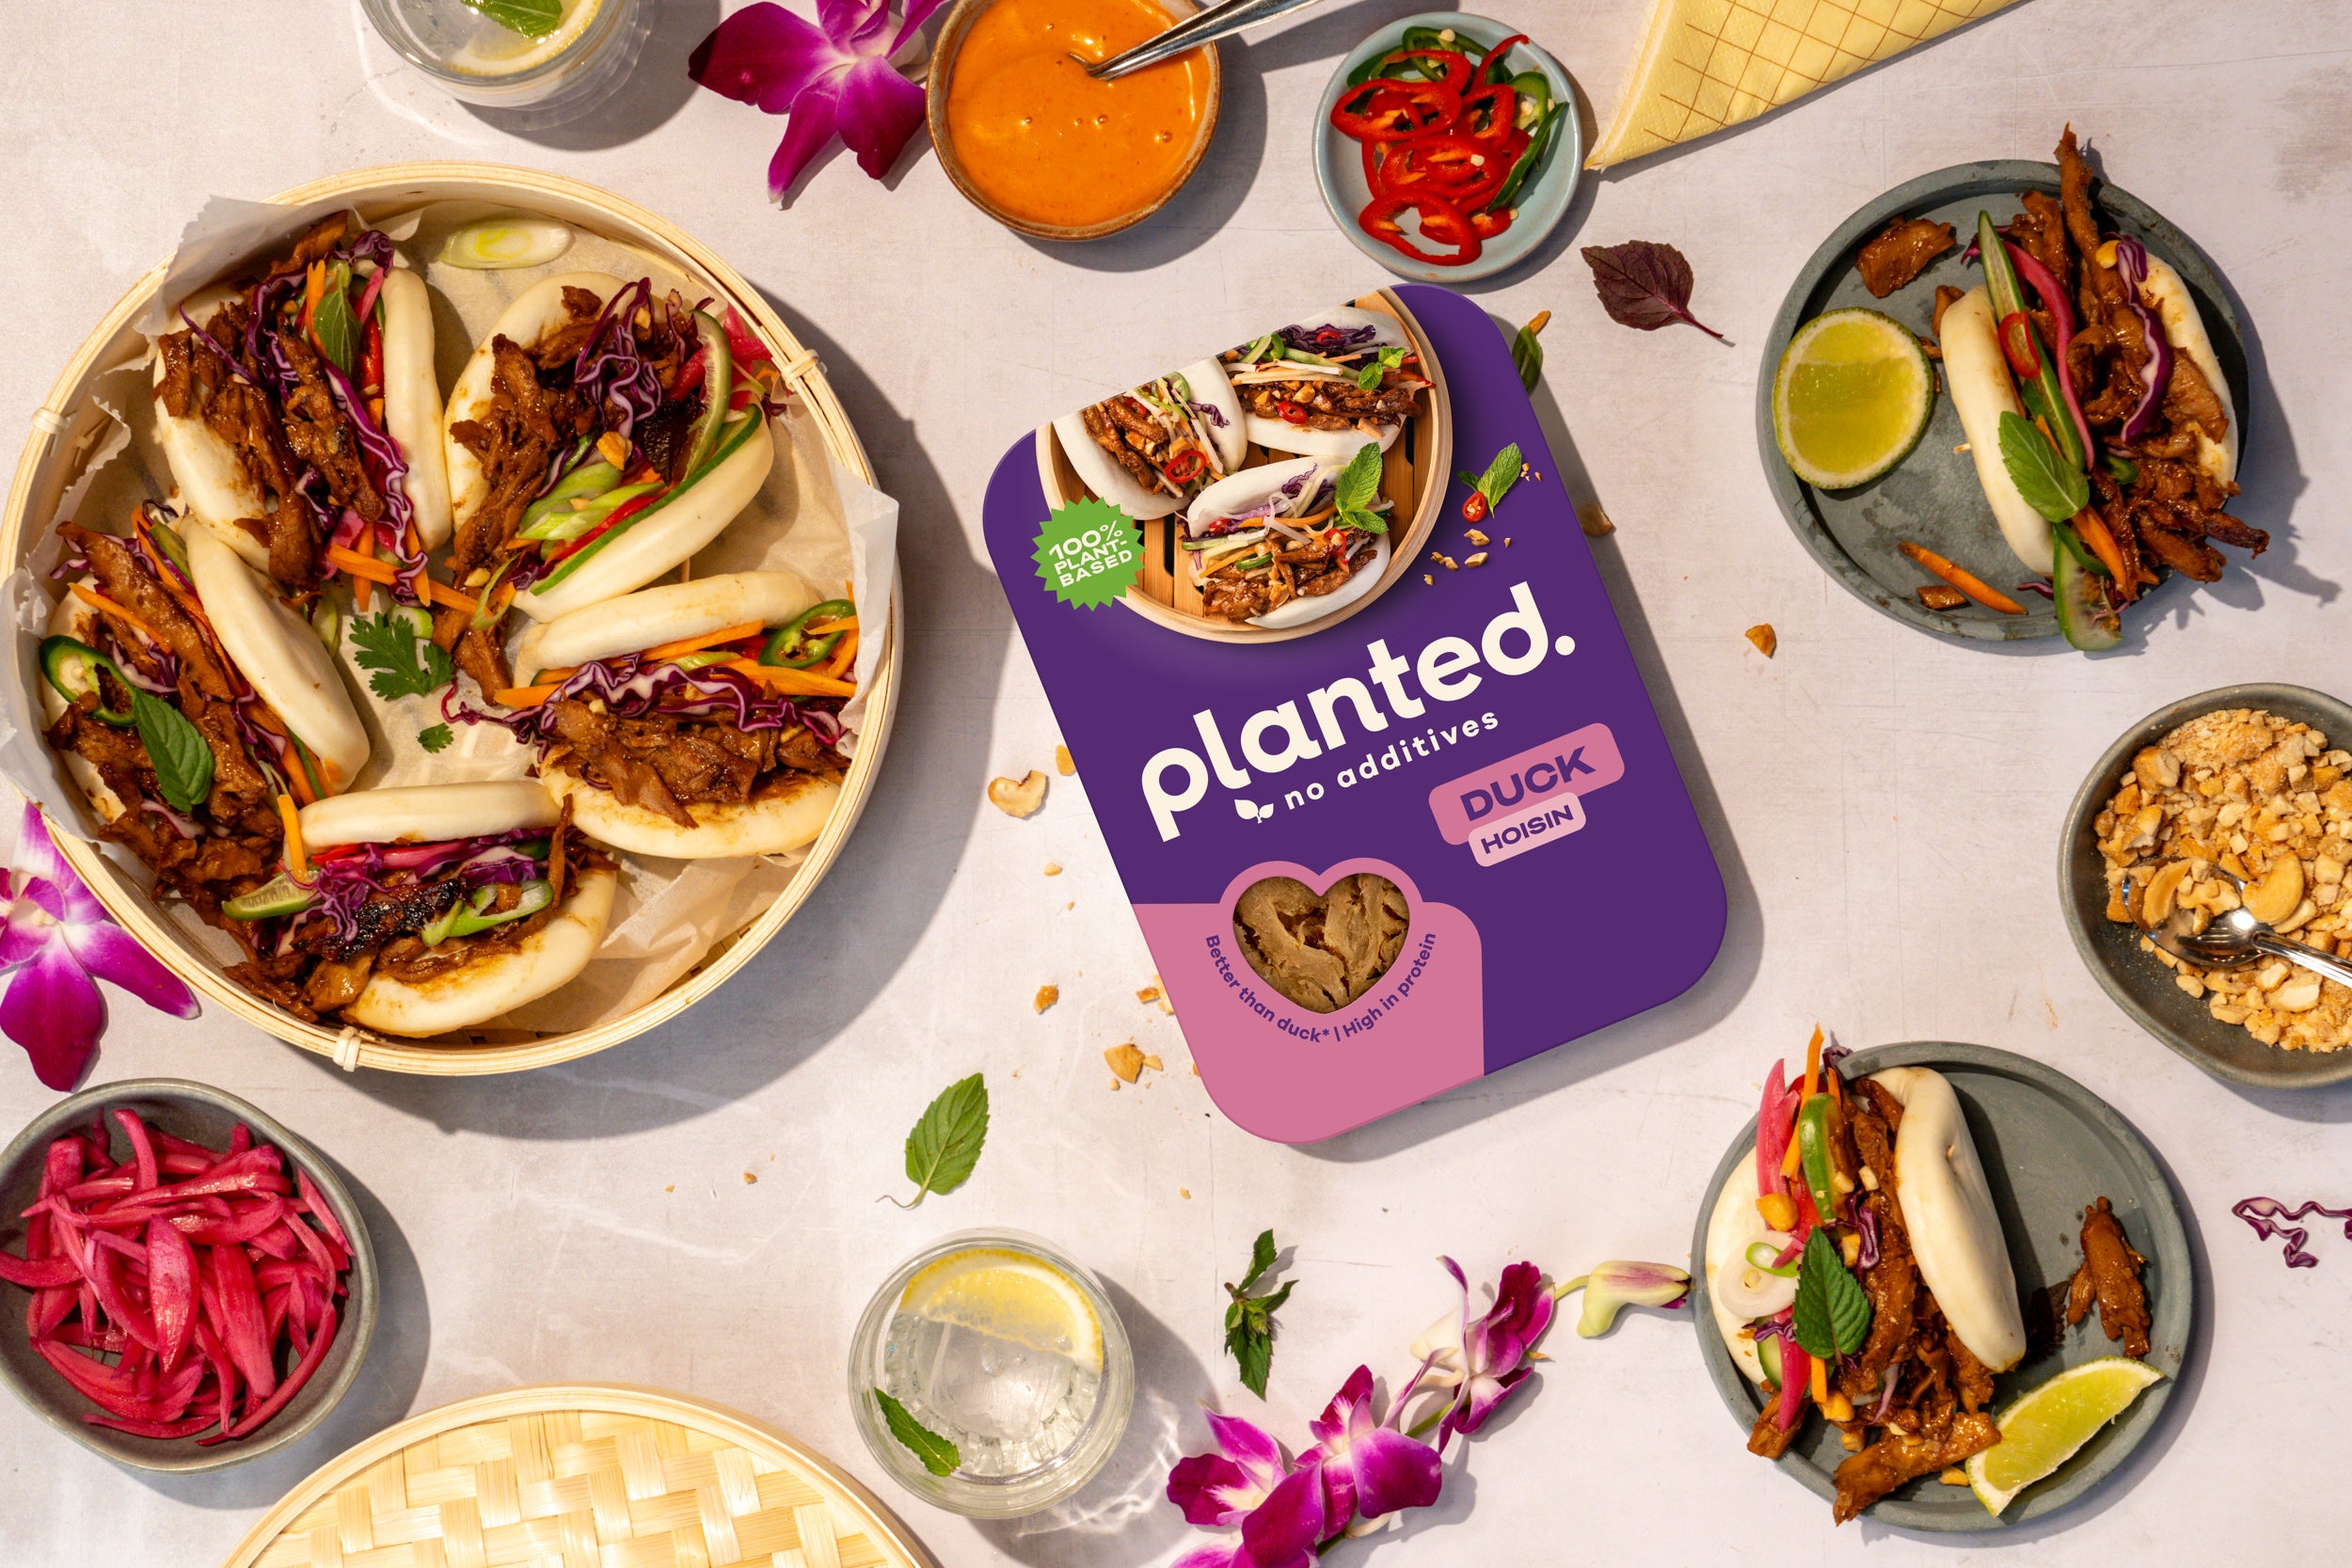 Planted launches at Tesco & unveils new product planted.duck